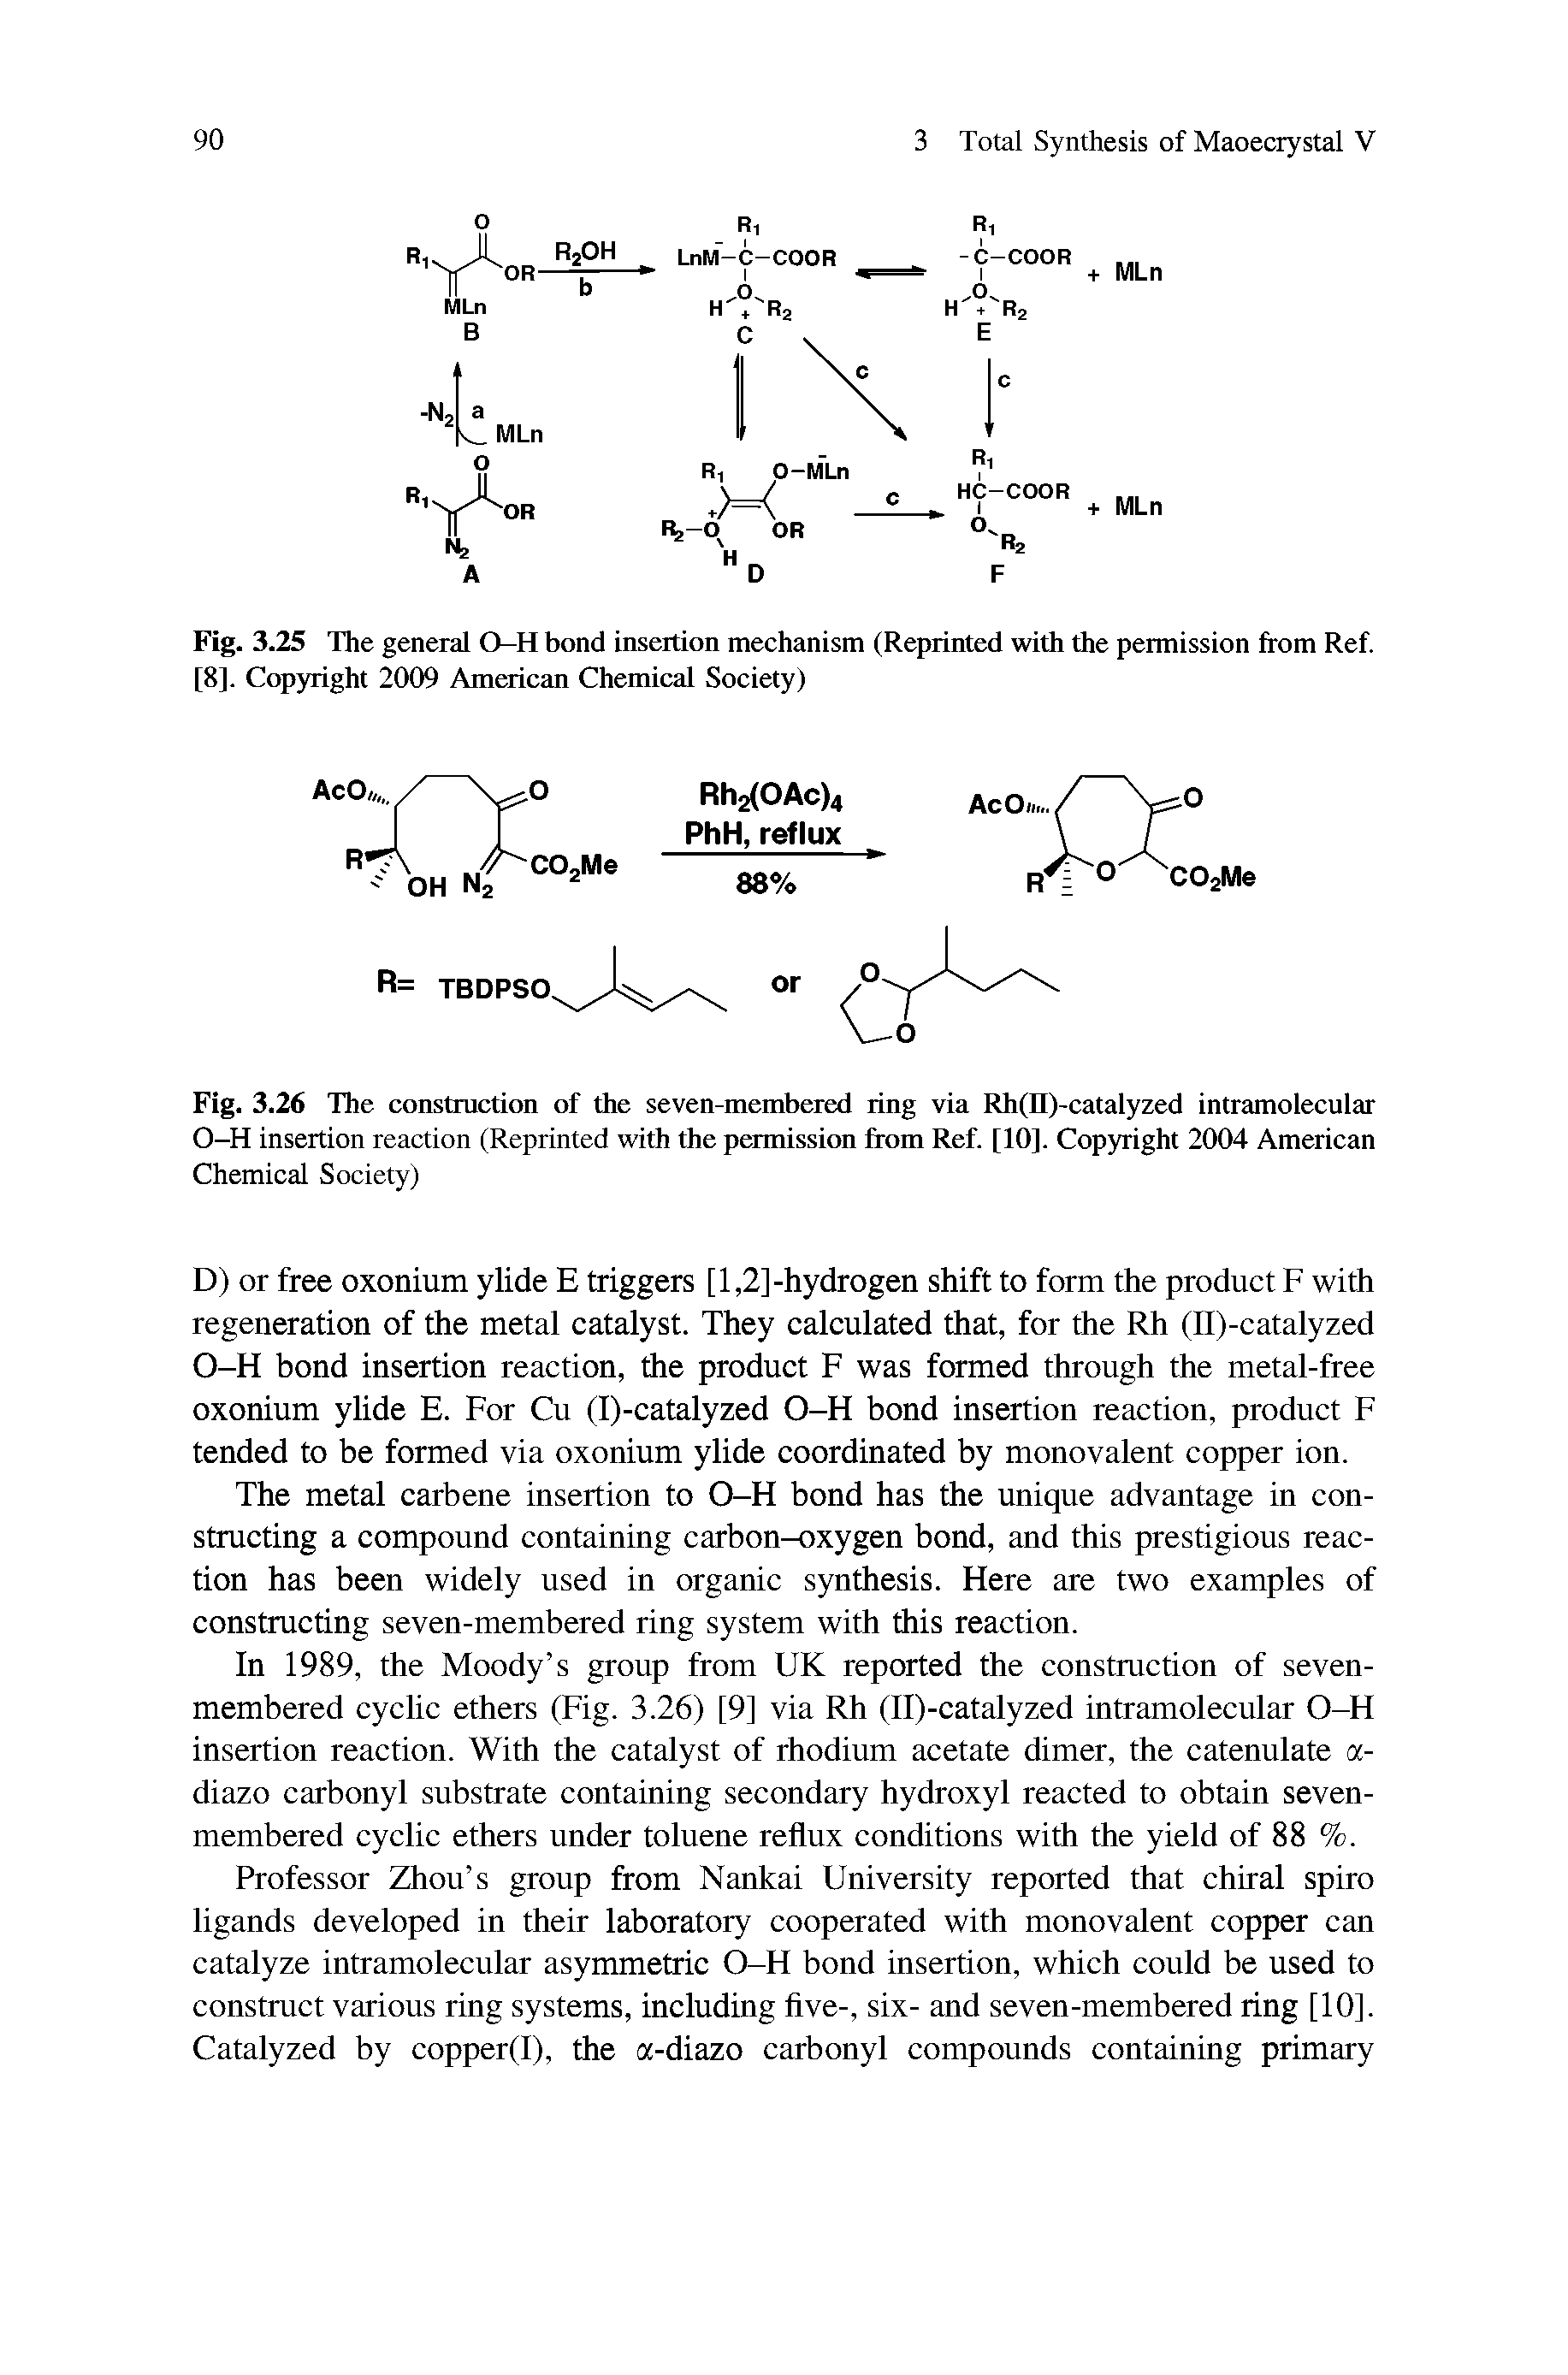 Fig. 3.25 The general O-H bond insertion mechanism (Reprinted with the permission from Ref. [8]. Copyright 2009 American Chemical Society)...